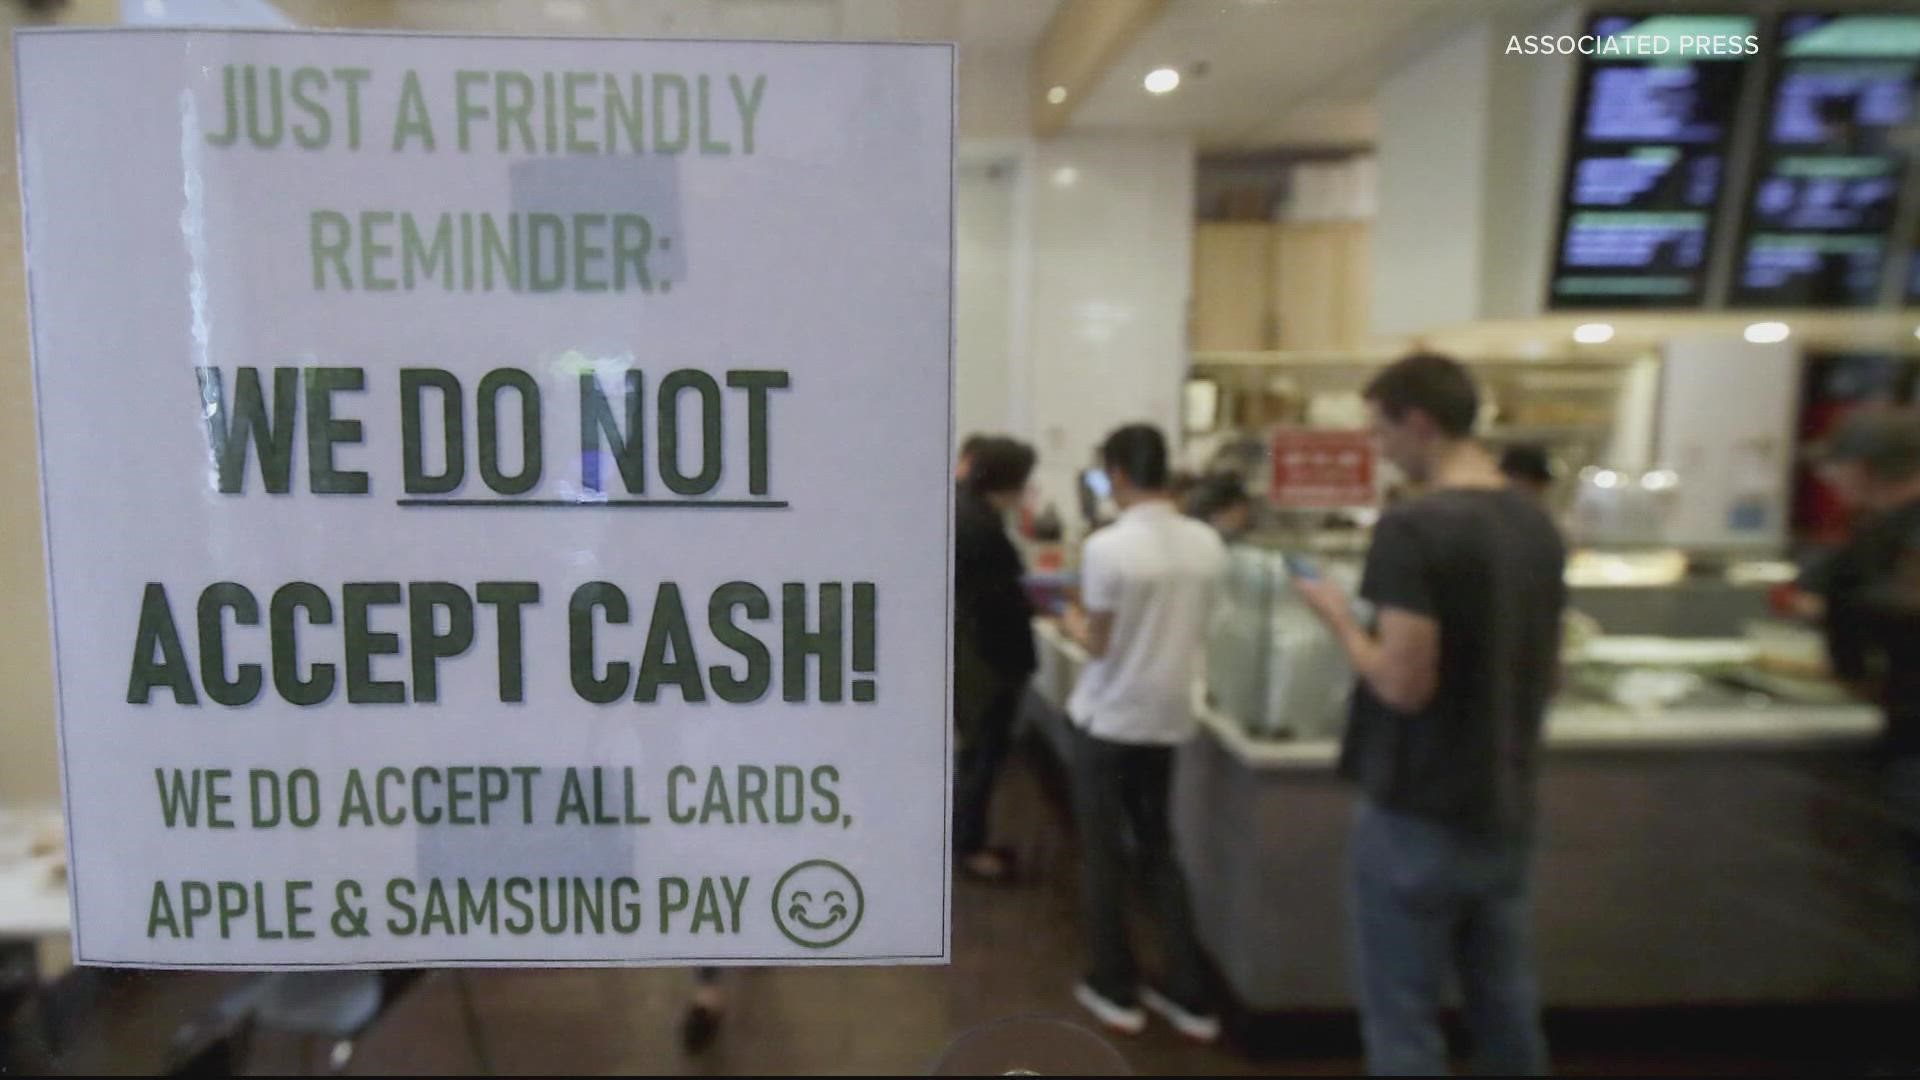 Are businesses in the DMV required to accept cash? Let's Verify.